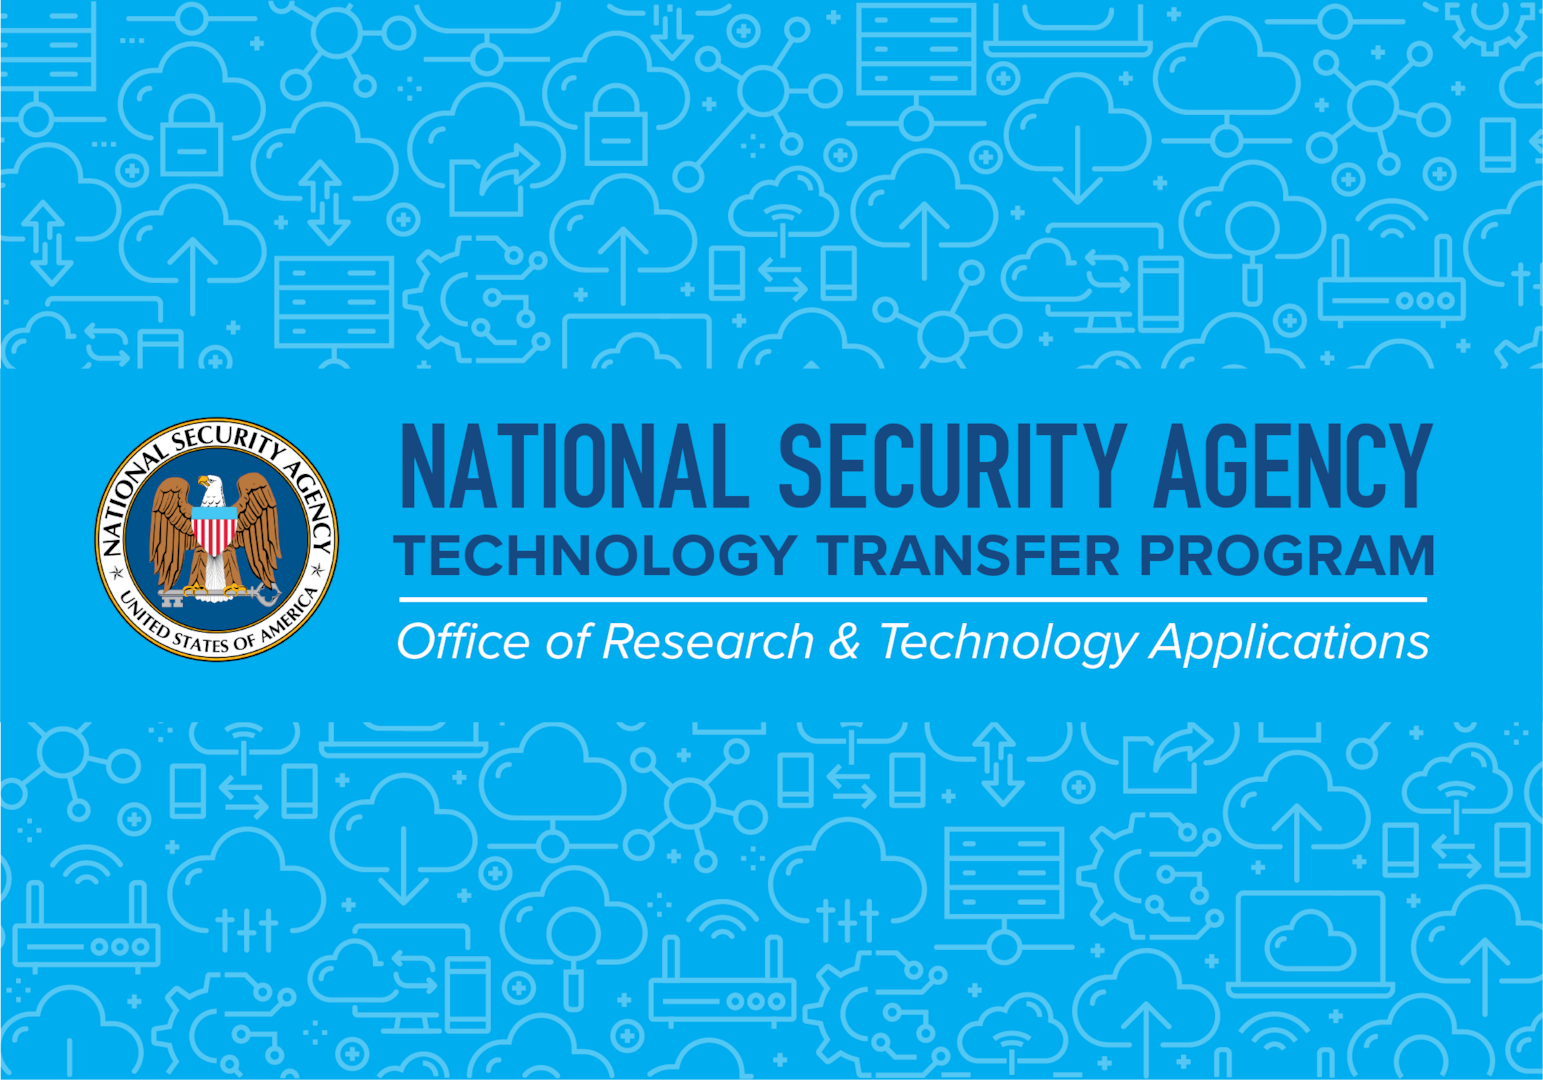 National Security Agency | Technology Transfer Program | Office of Research & Technology Applications